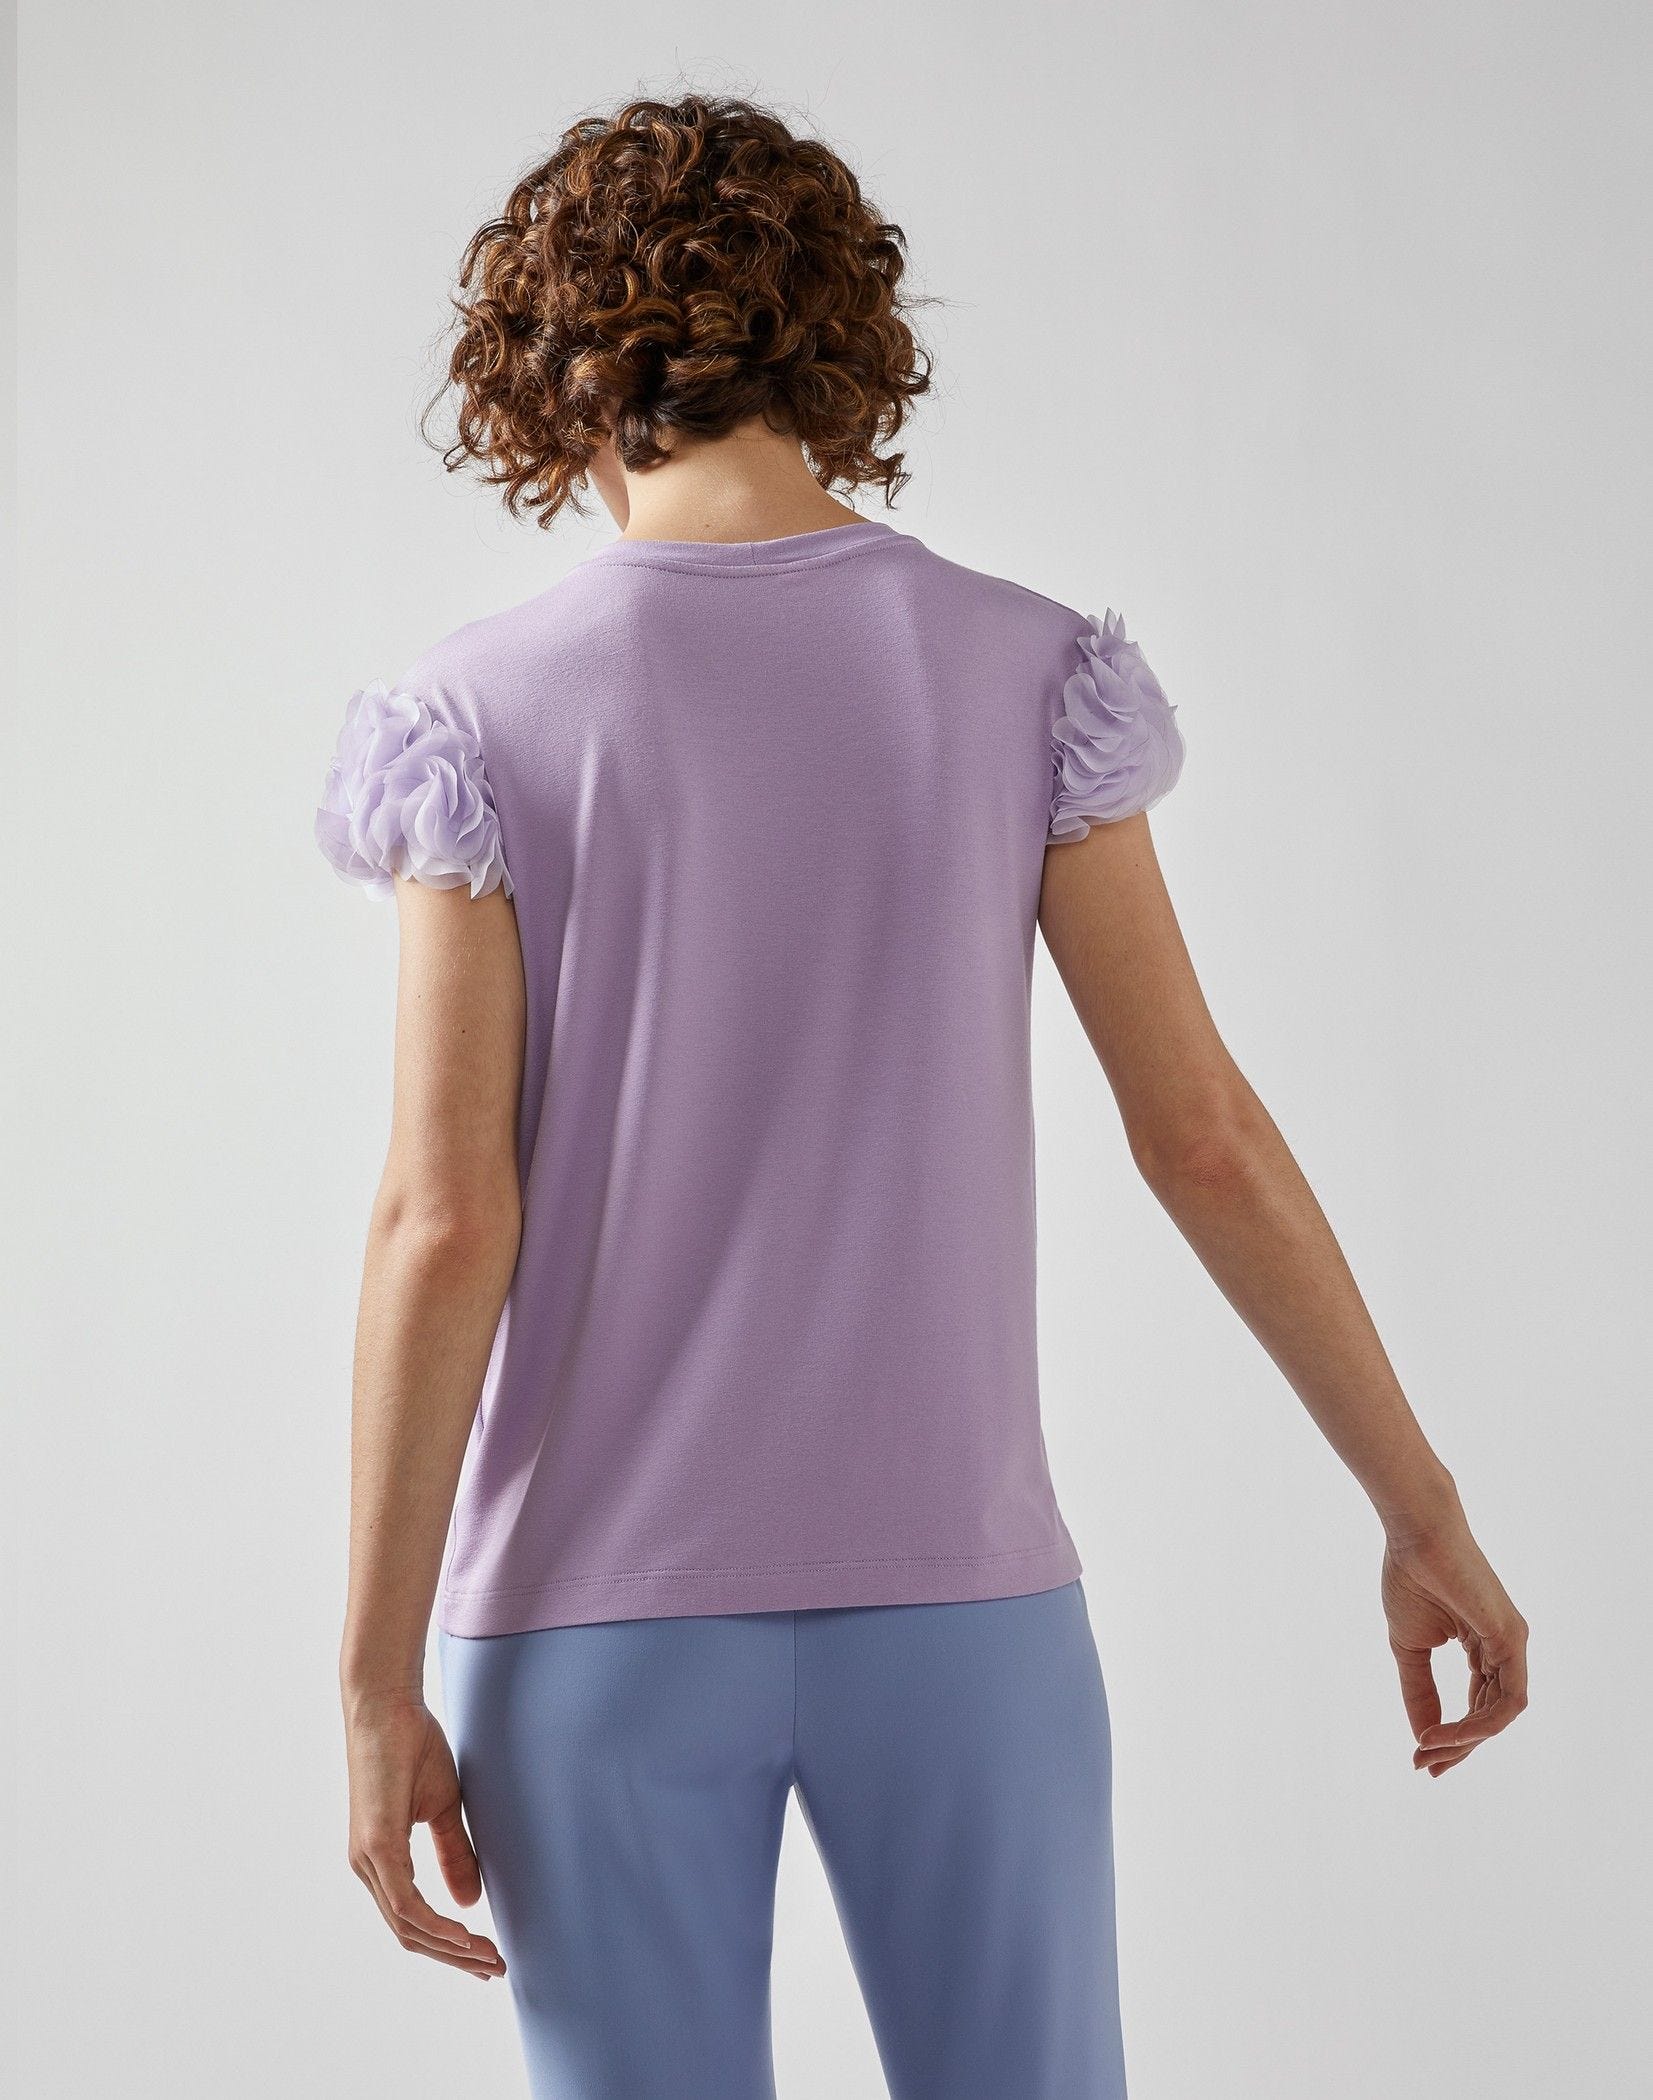 Viscose jersey crew-neck top with chiffon details